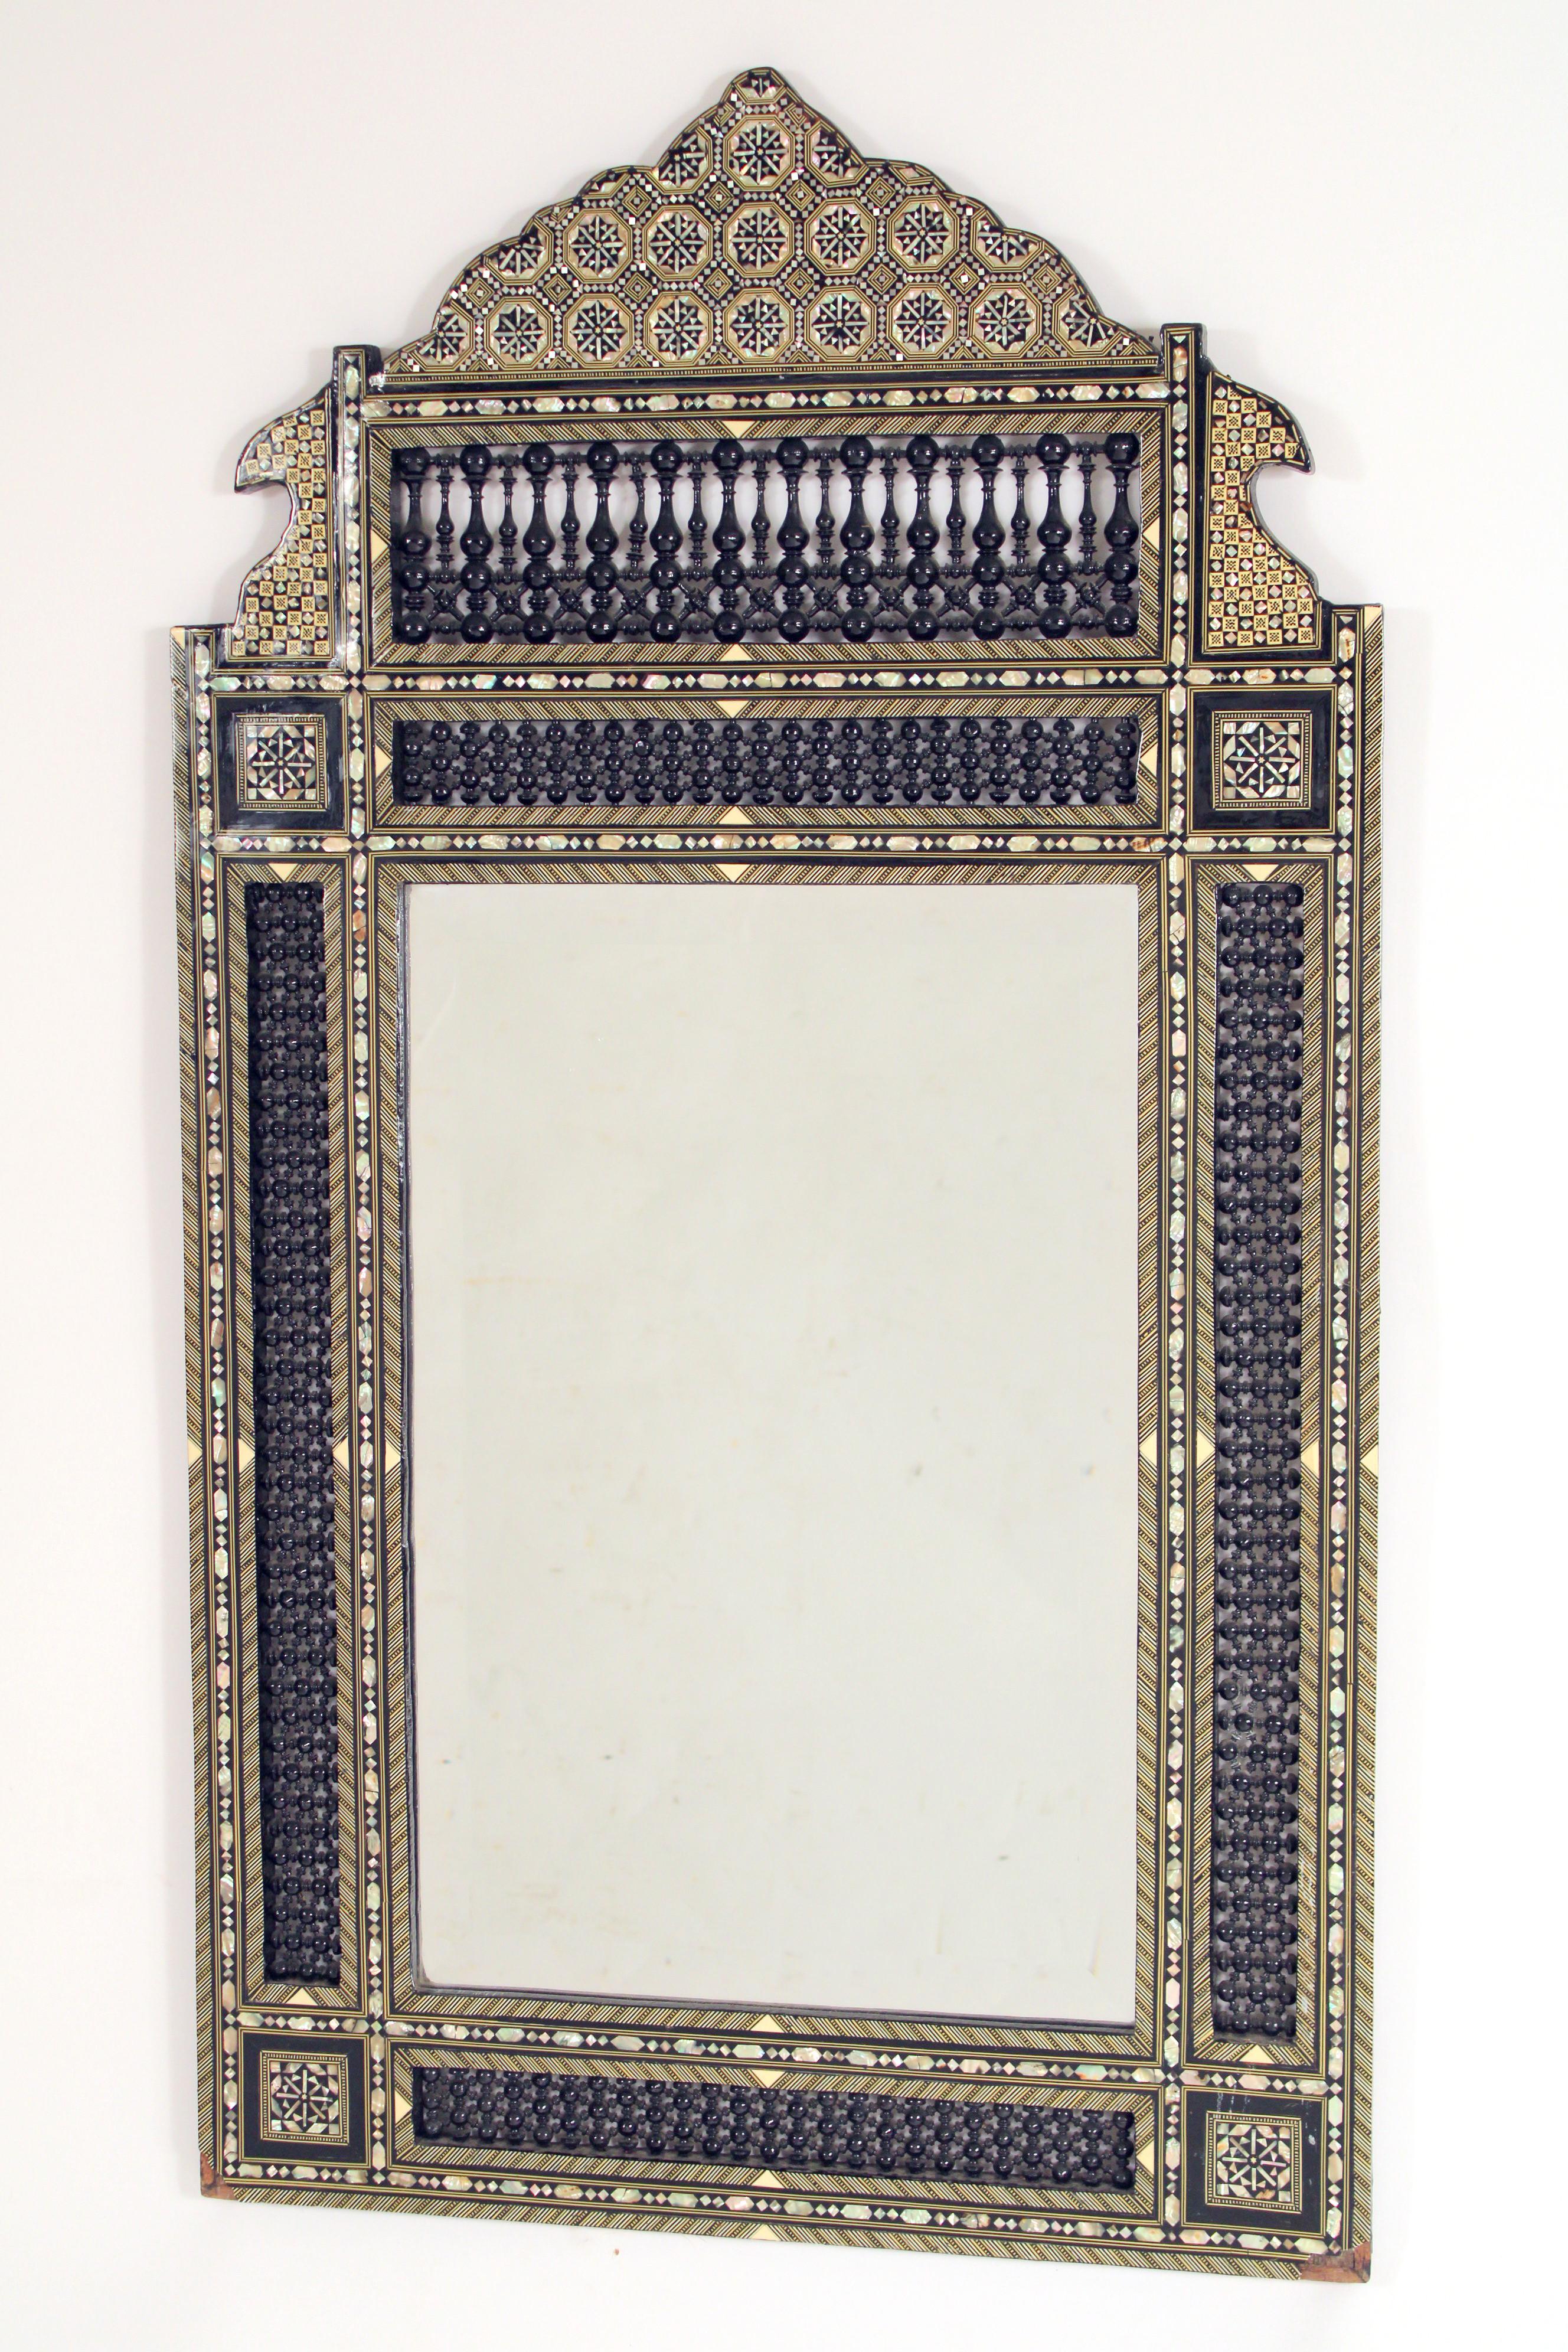 Middle Eastern Mother of Pearl Inlaid Mirror In Good Condition For Sale In Laguna Beach, CA